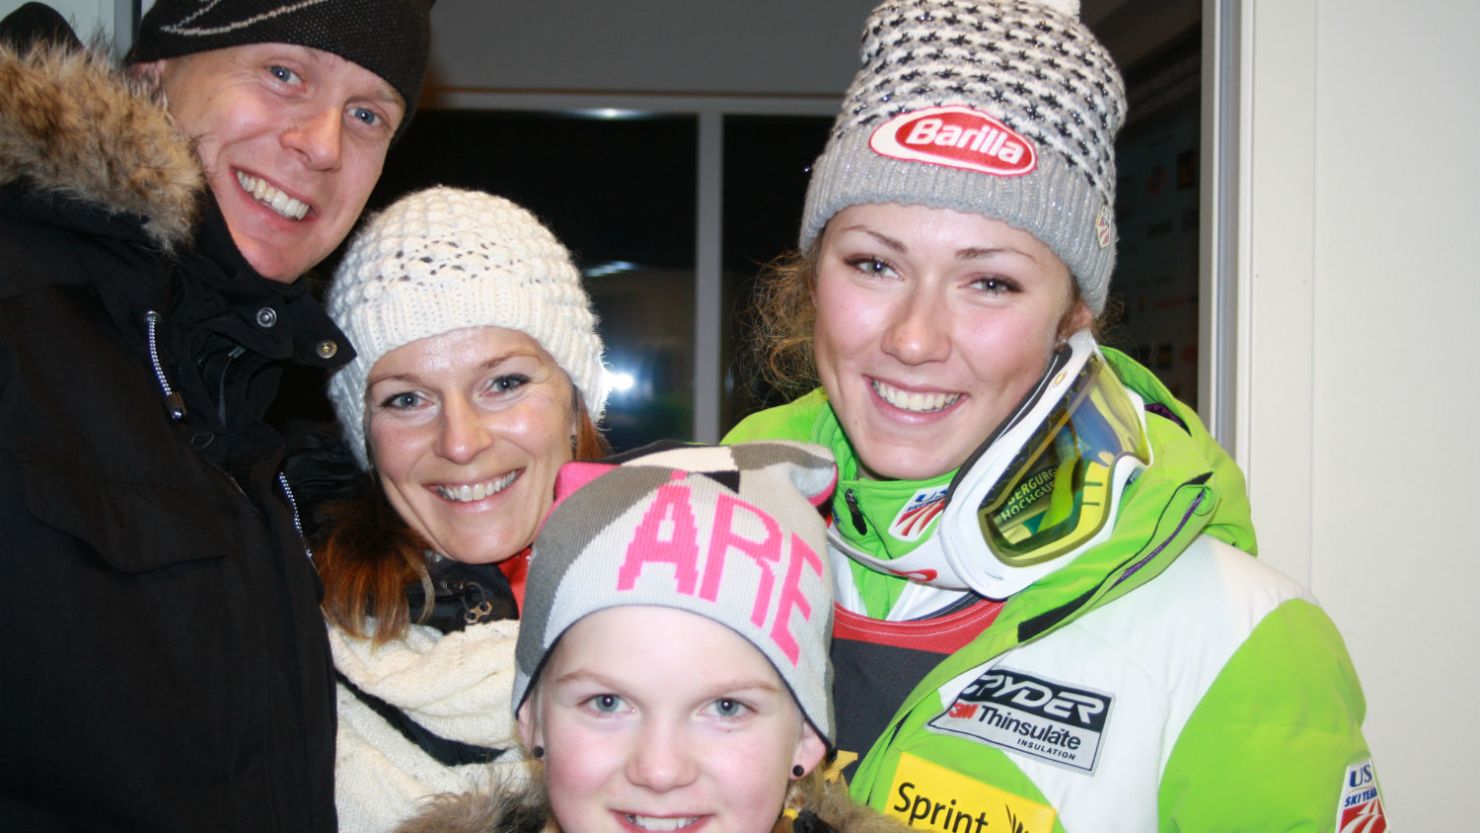 Mikaela Shiffrin and the Lundell family pose together in 2012, just after Shiffrin had won her first World Cup gold medal. Left-right: Mikael Lundell, Annika Lundell, Emma Lundell, Mikaela Shiffrin.